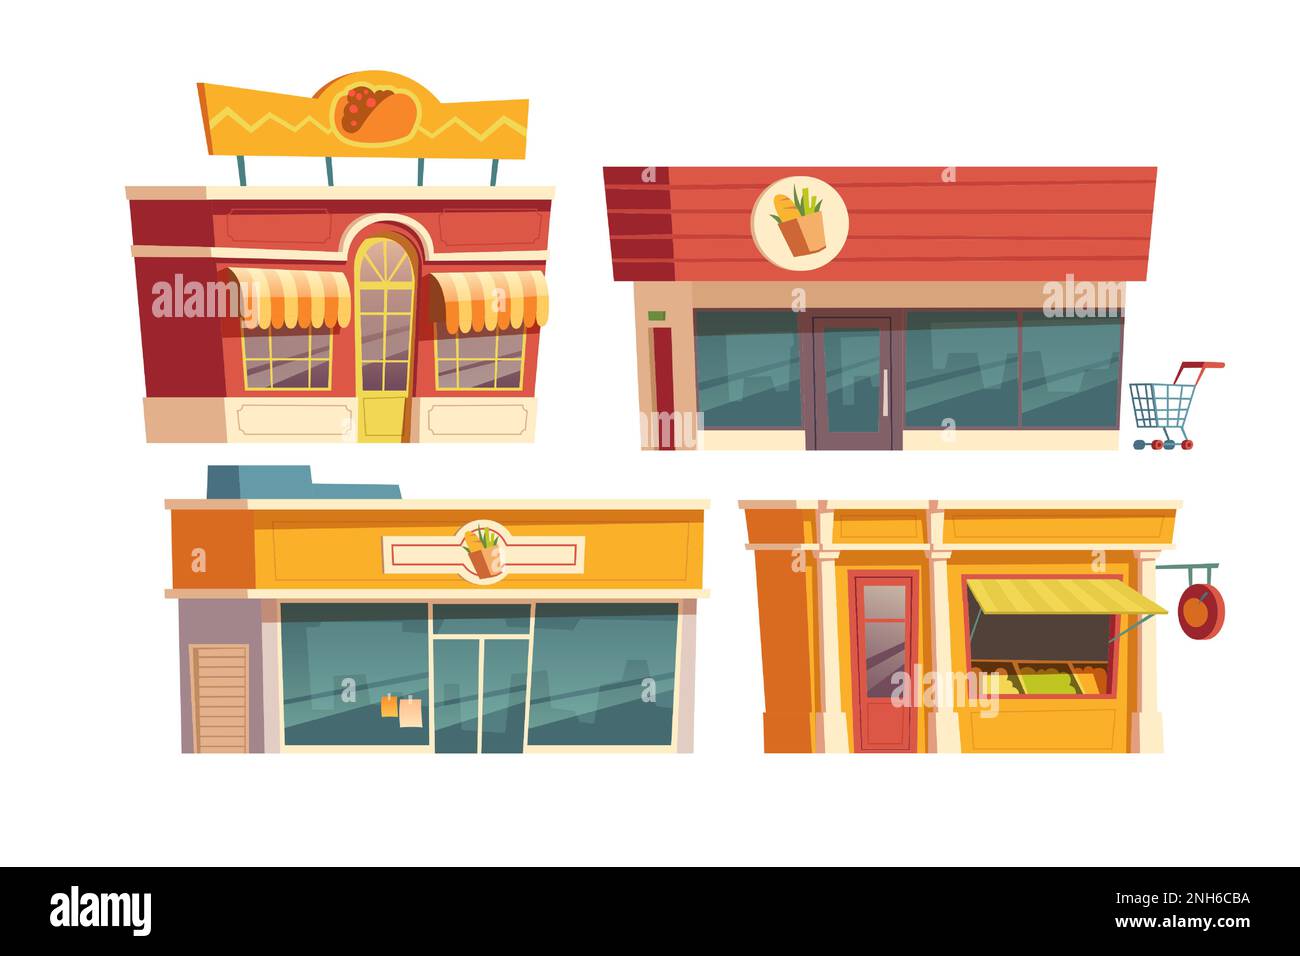 Fast food restaurant and shops building cartoon vector illustration. Facades of food markets and cafes or bistros with signboards. City small business storefront exterior isolated on white Stock Vector